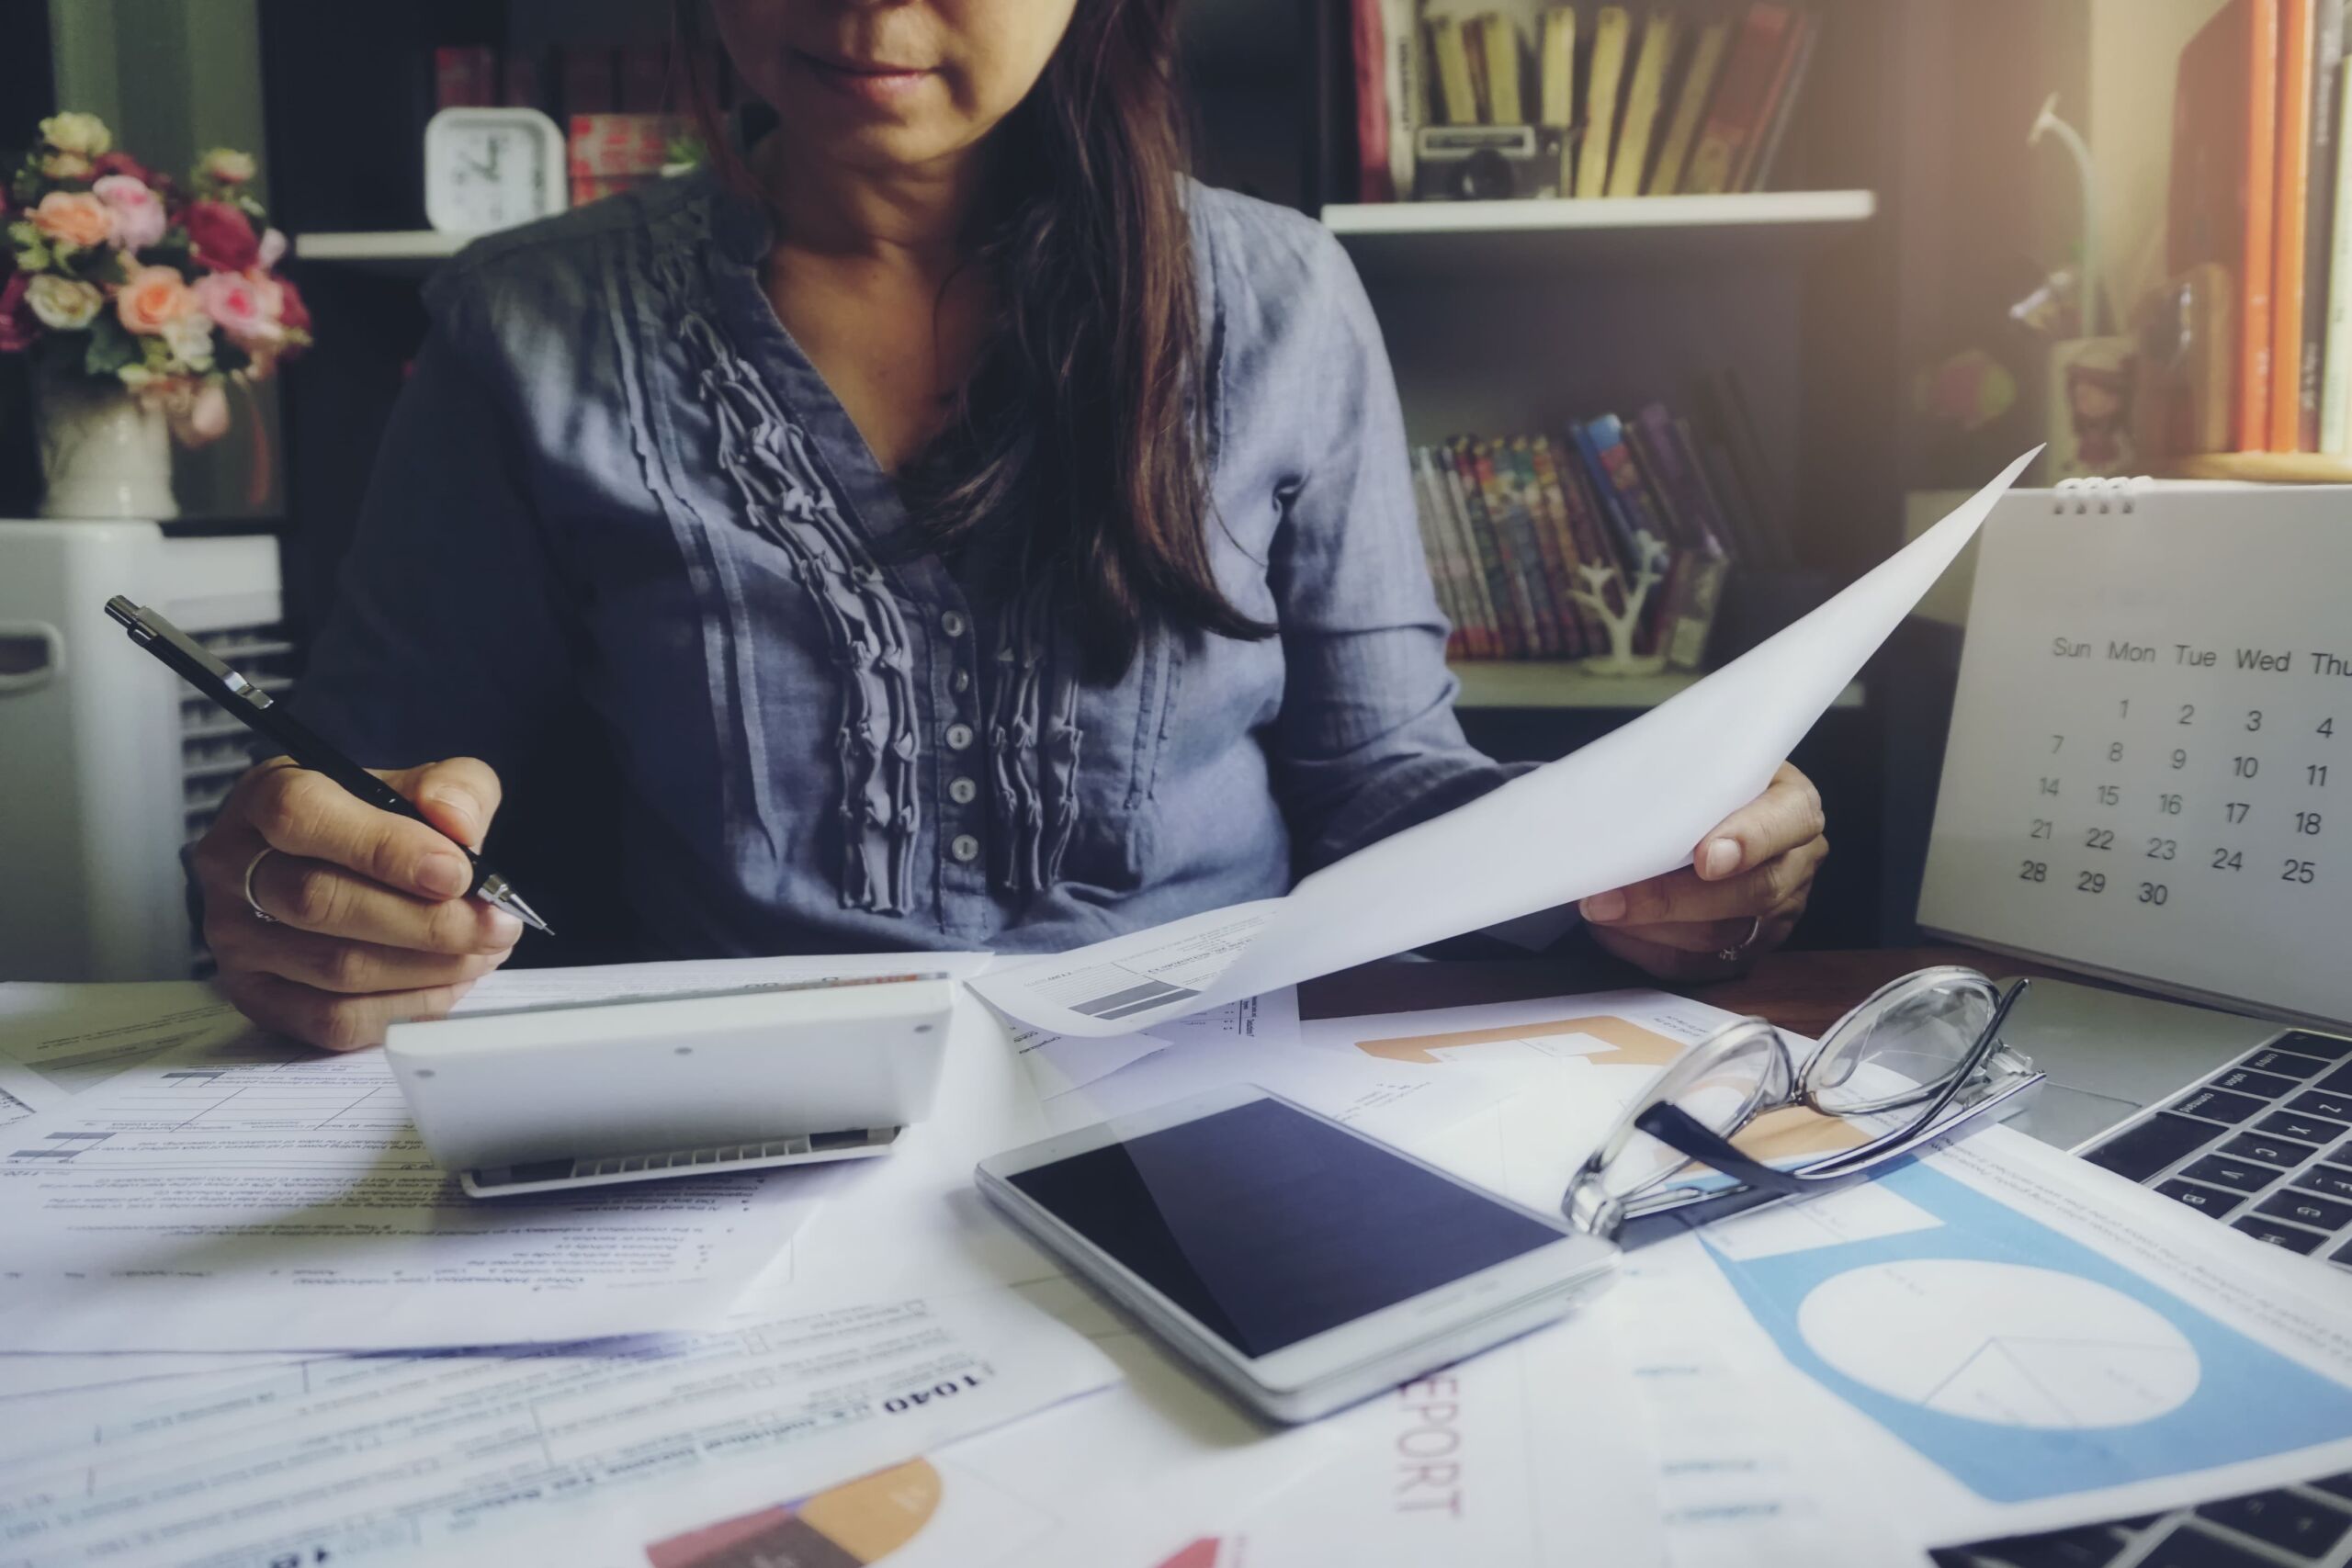 A Black female accountant working at a desk spread out with papers, a laptop, a calendar, a calculator, and a phone.